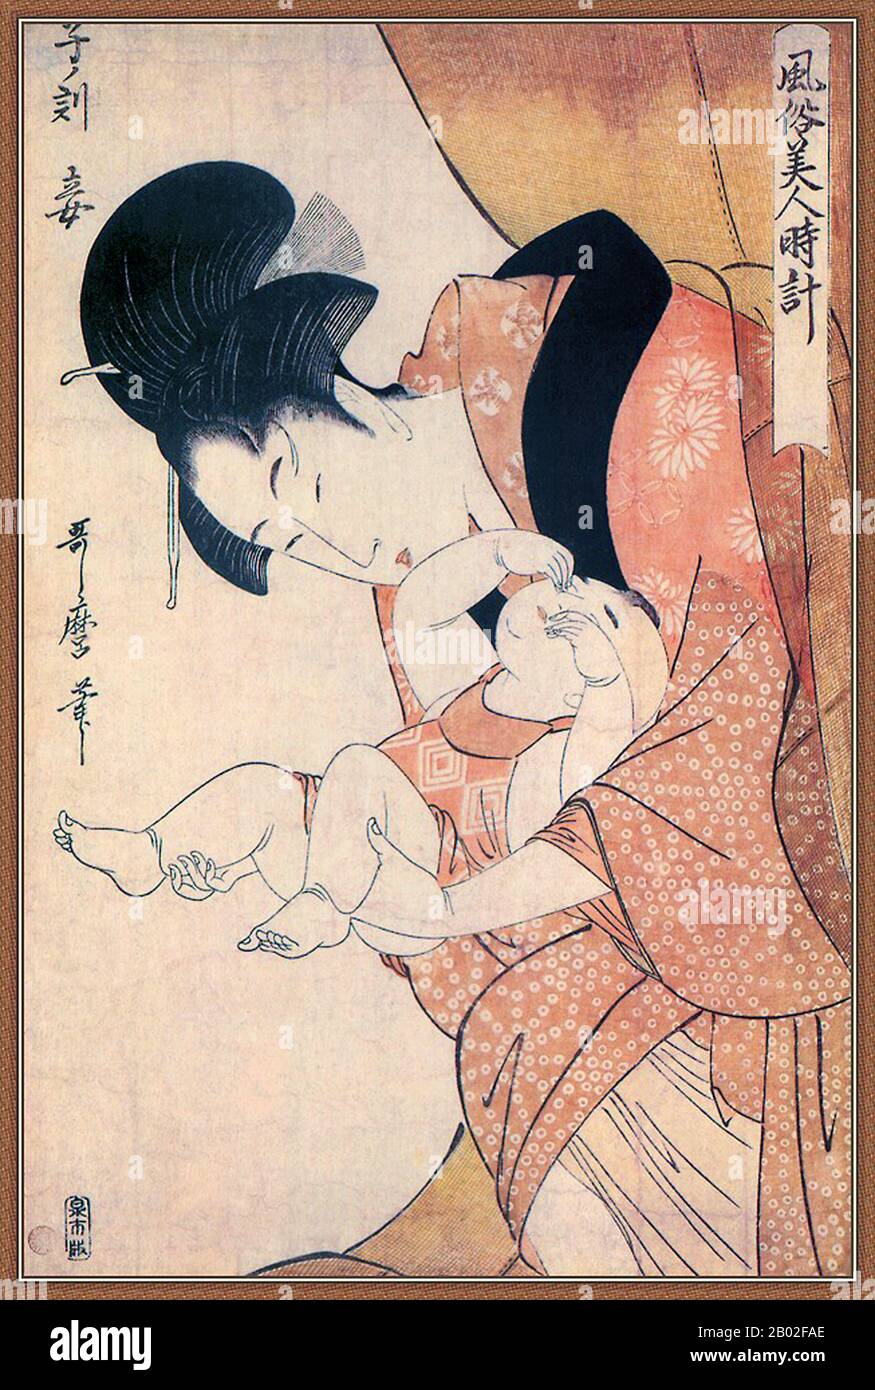 Kitagawa Utamaro, perhaps the most celebrated artist of the 'bijin' genre of portraying beautiful women, was efascinated by images of mother and child in daily life.  This print belongs to a series entitled Fuzoku Bijin Tokei ( Daily Customs of Beautiful Women). To illustrate midnight, Utamaro has chosen a mother who sleepily emerges from her mosquito net to attend to her child, who rubs the sleep from his eyes. Stock Photo